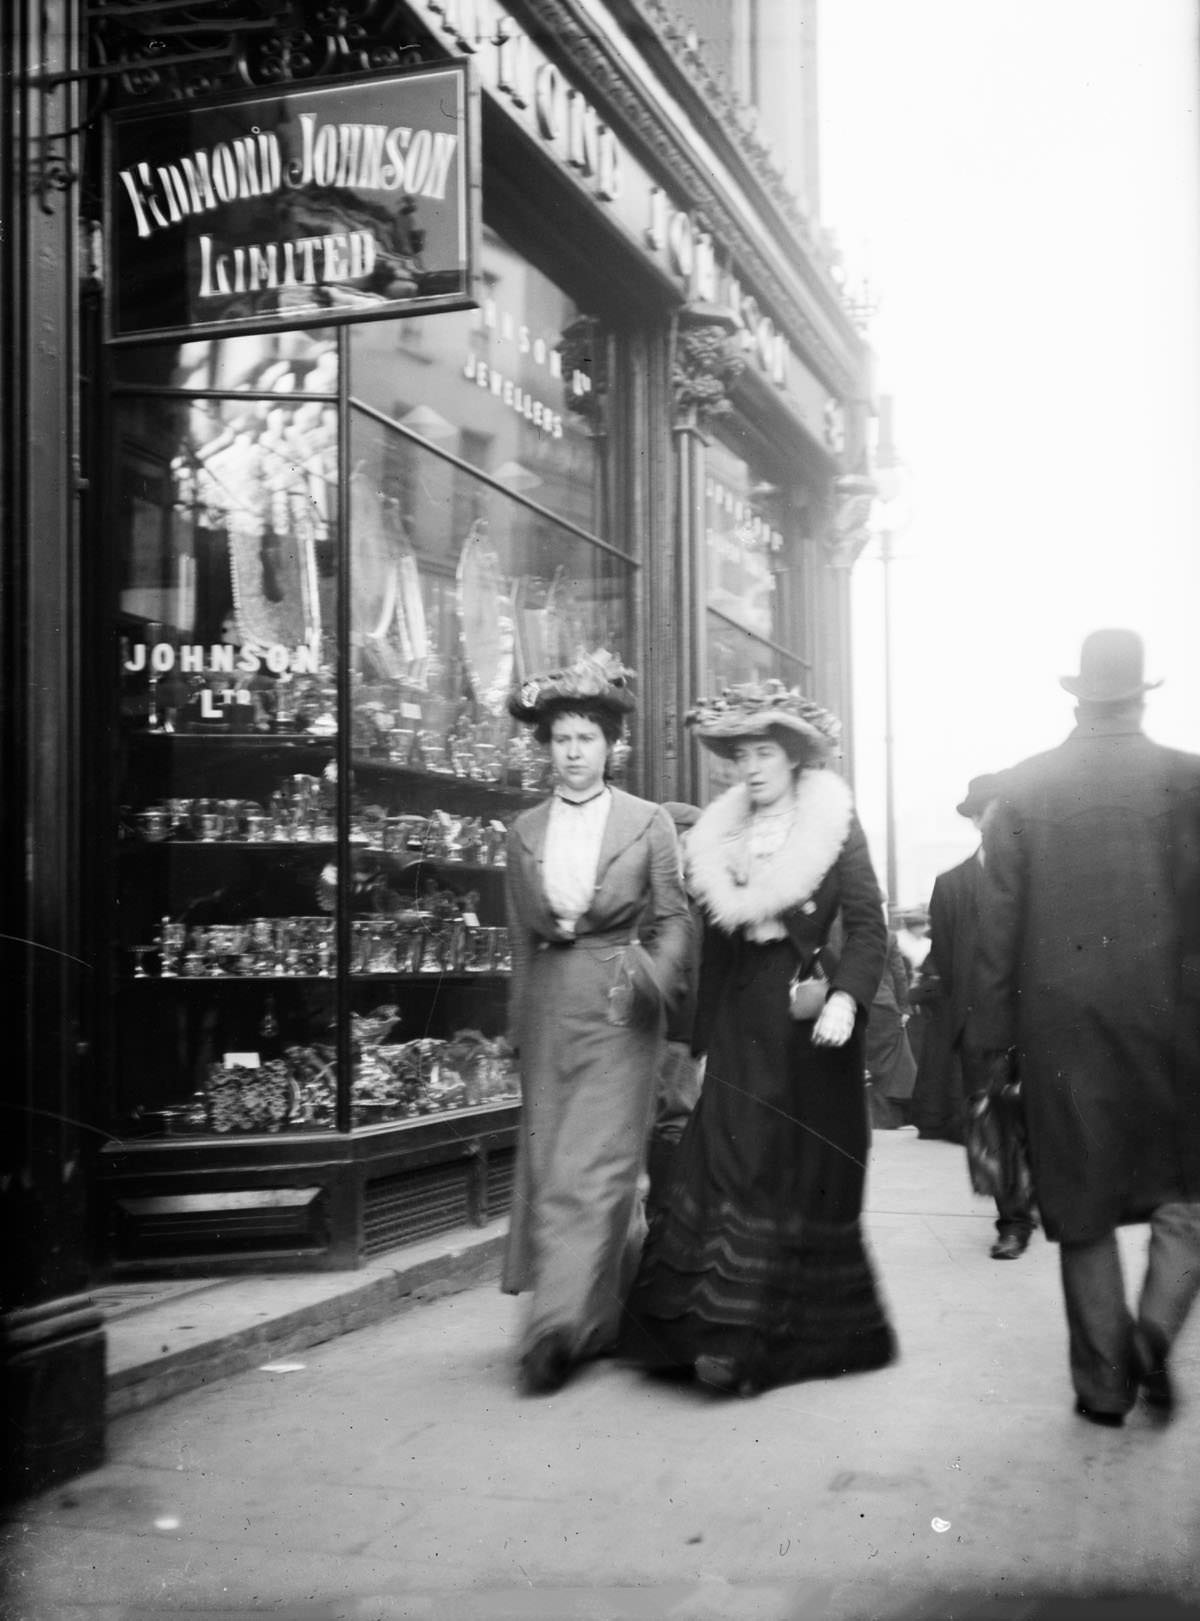 Everyday Life in Dublin, Ireland at the Turn of the 20th Century